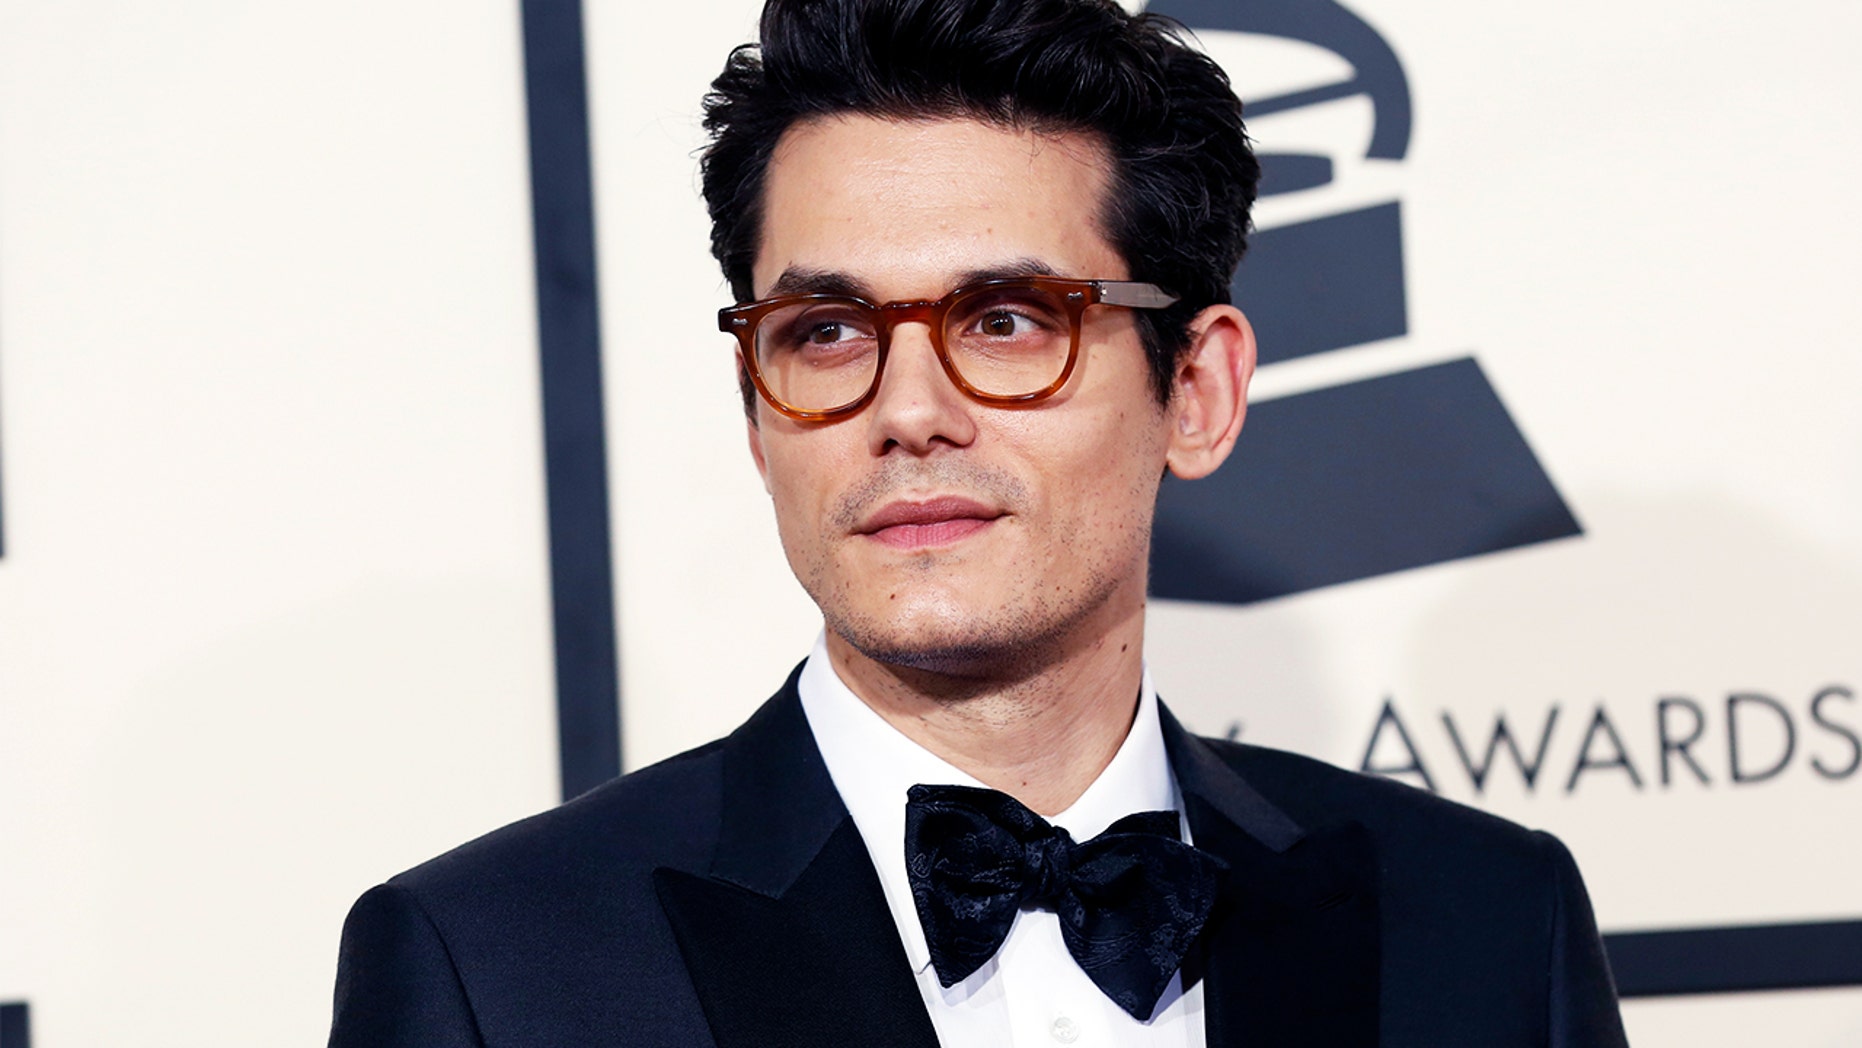 Musician John Mayer launches a foundation to help veterans with post-traumatic stress disorder and the emerging needs of veteran women.